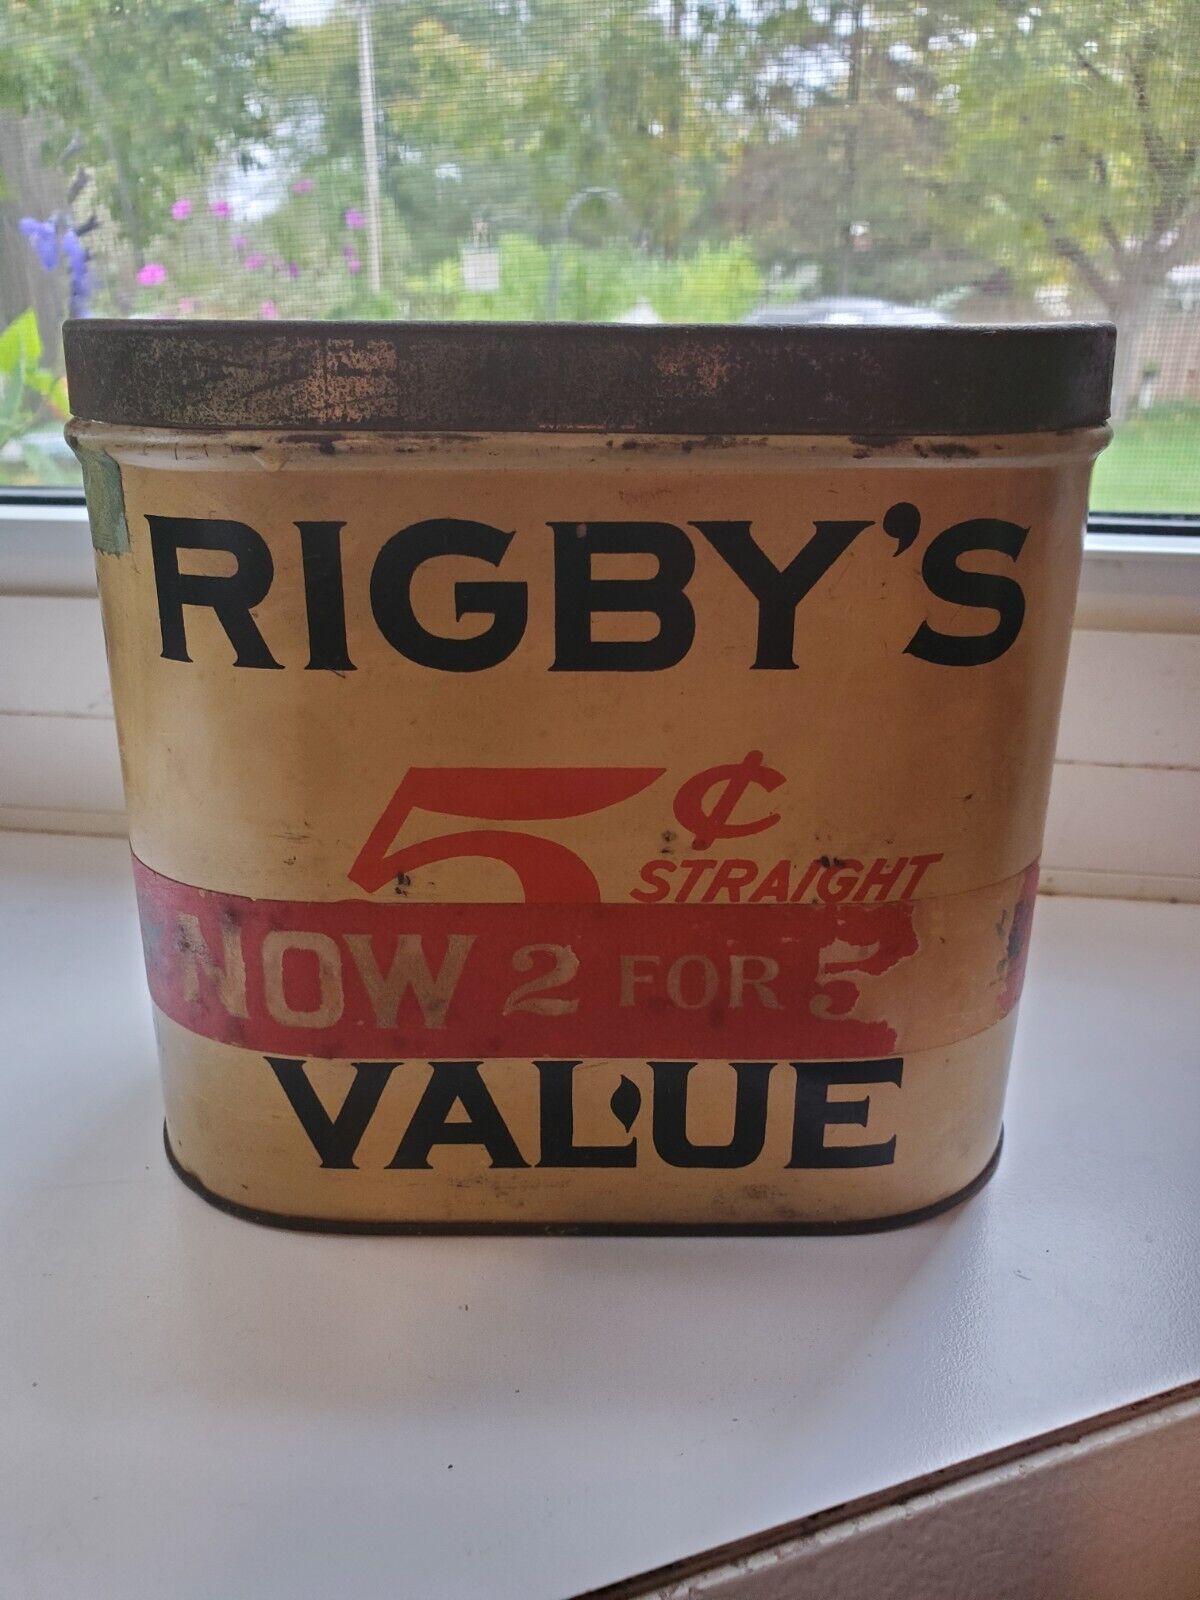 Vintage Rigby\'s Cigar tin, 1920\'s, Mansfield, Ohio, about 5.5\